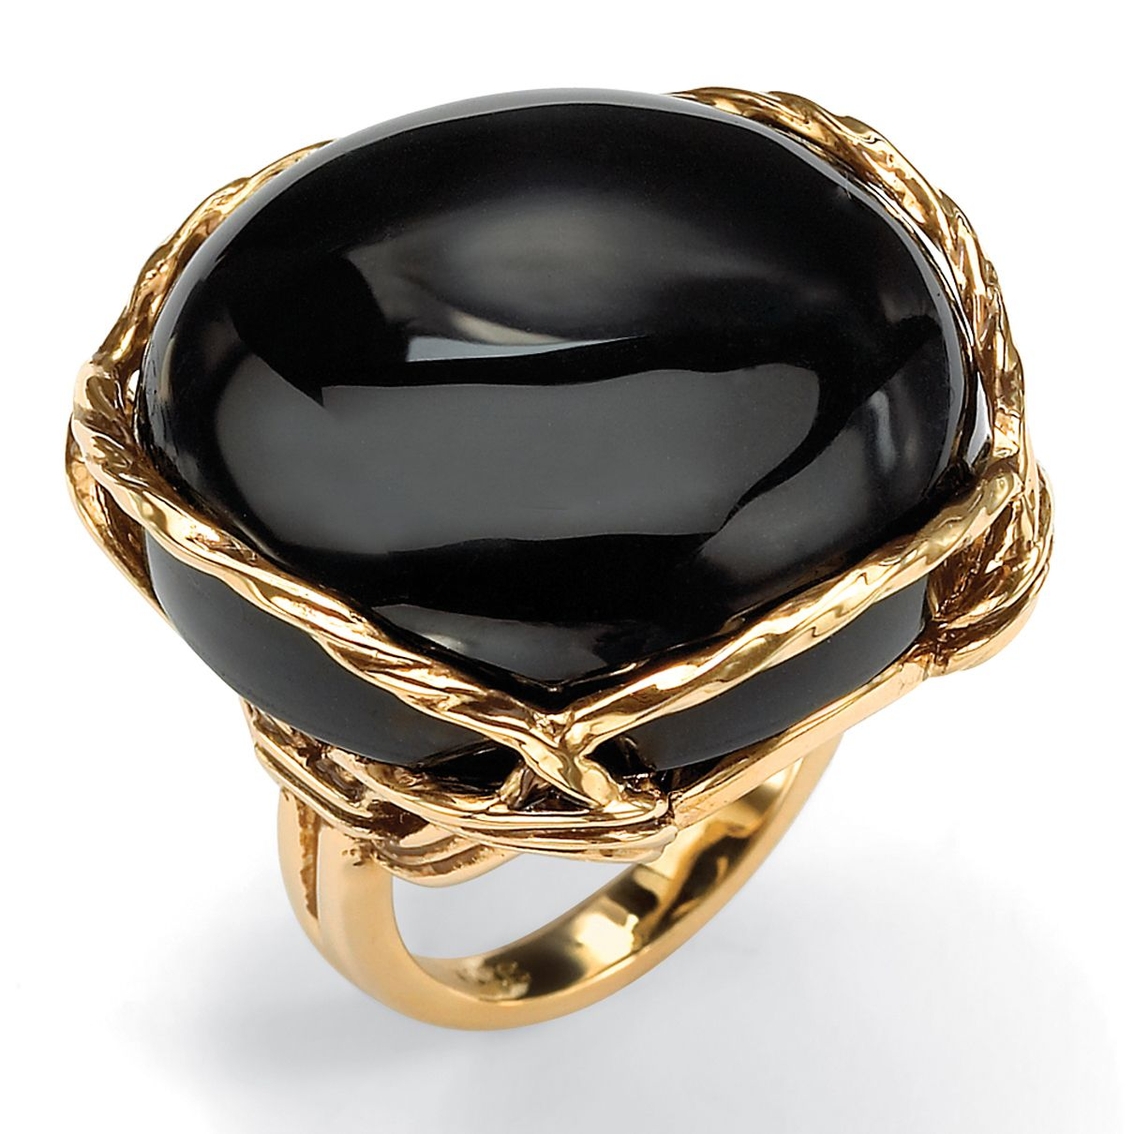 Genuine Black Onyx Gold-Plated Cabochon Pillow Ring - Image 4 of 5